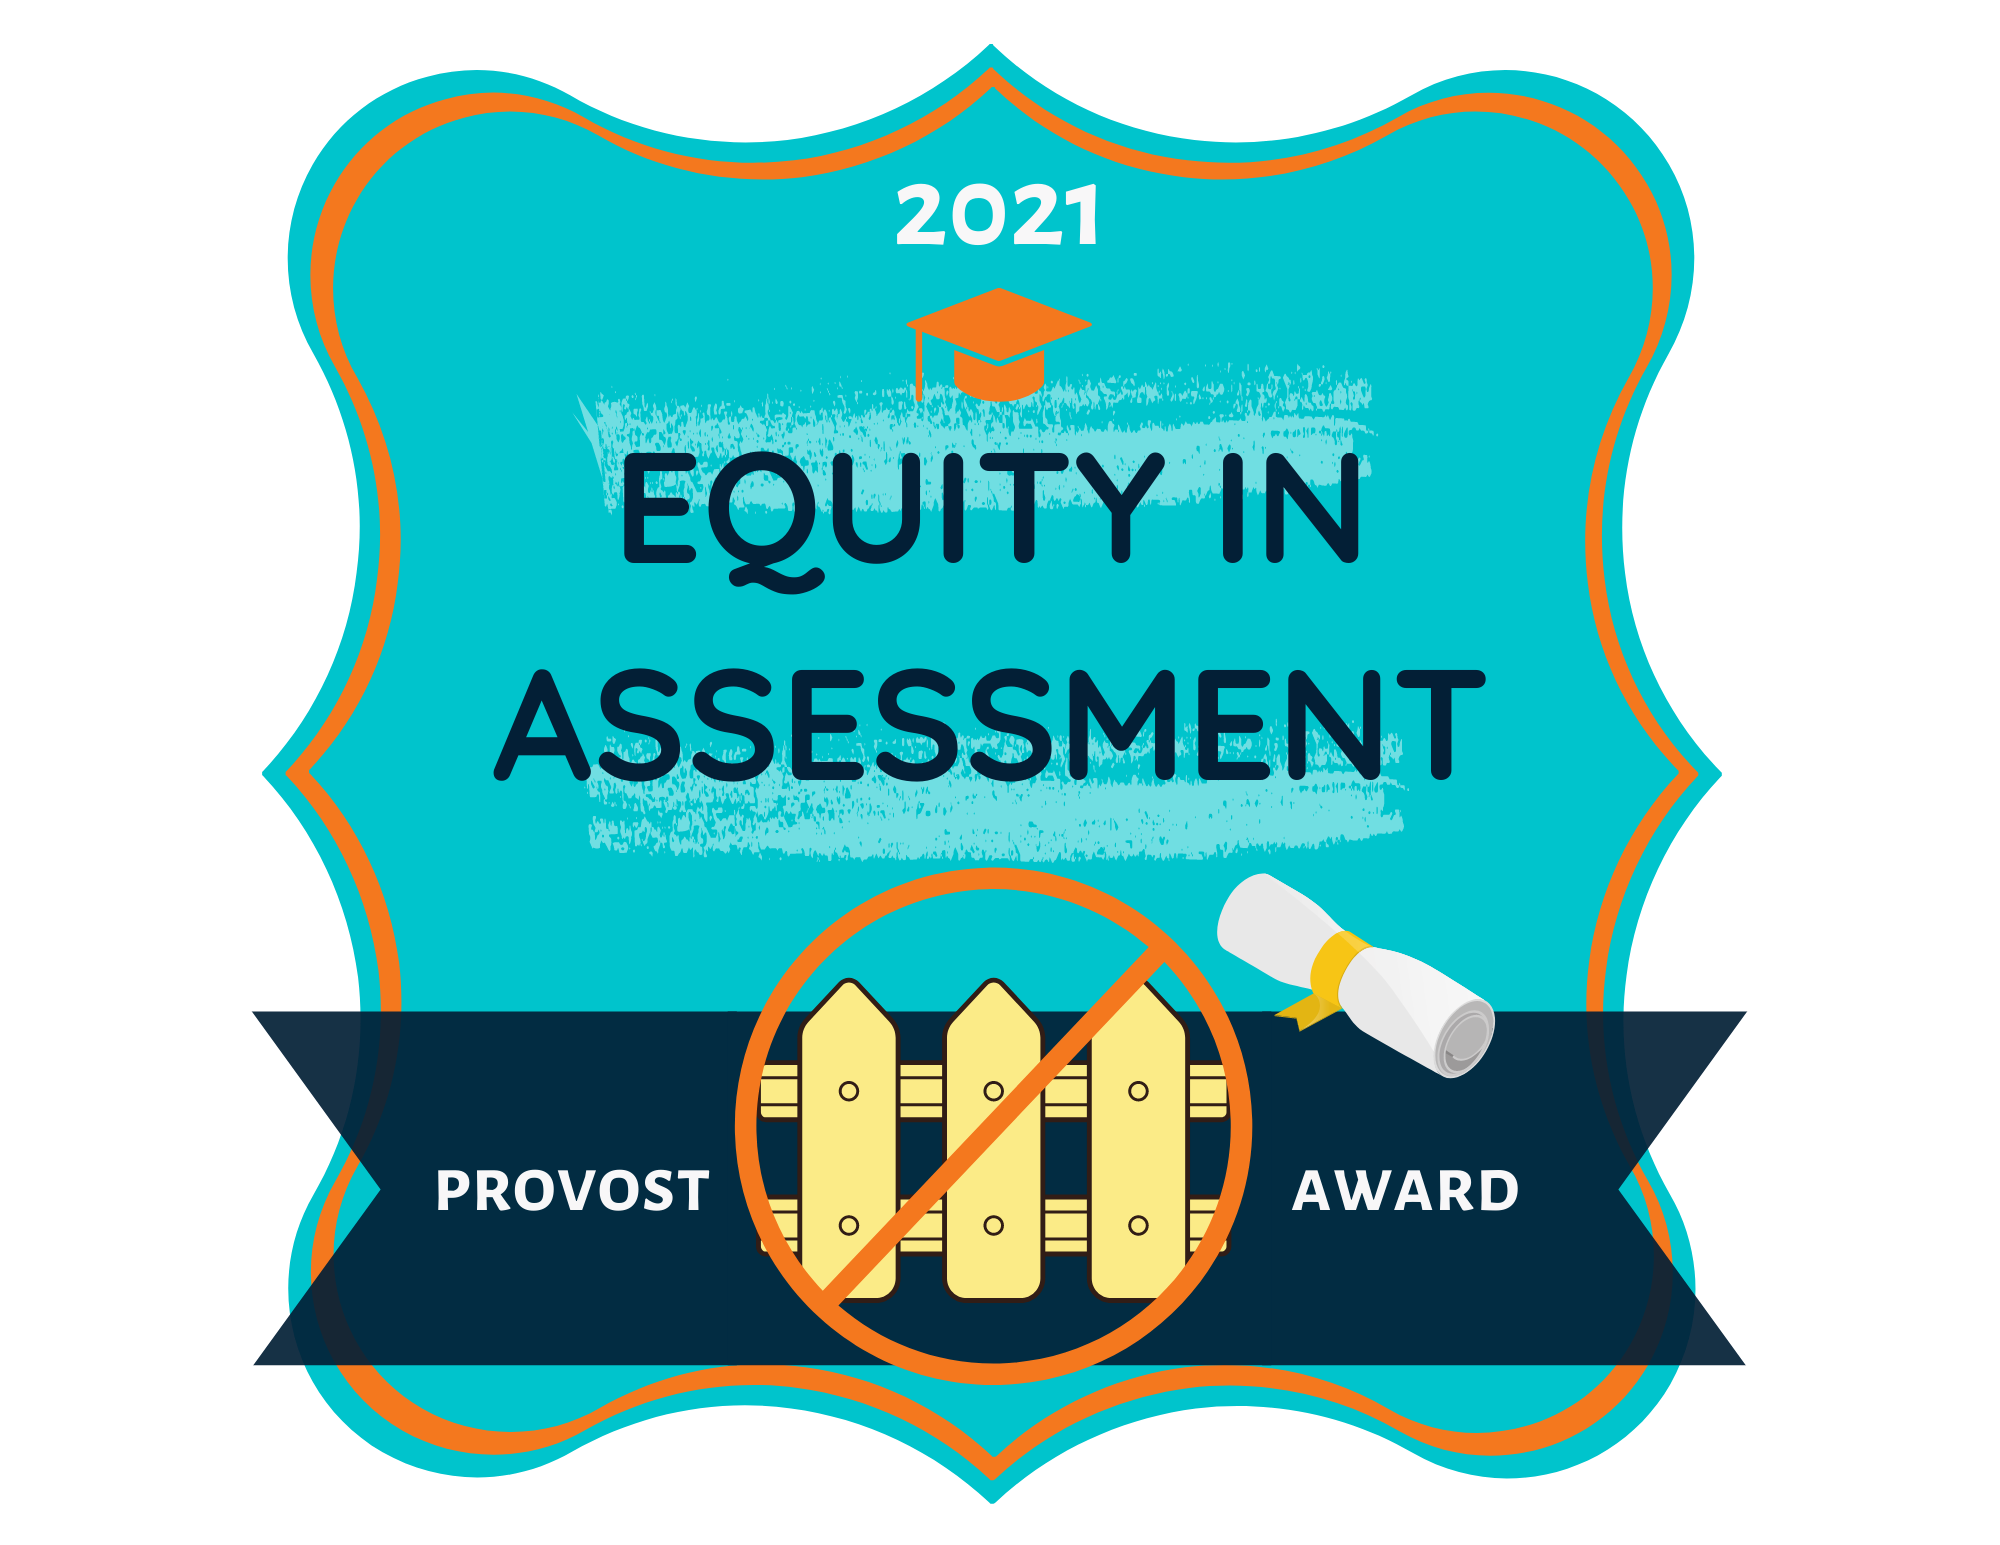 Equity in Assessment 2021 Badge